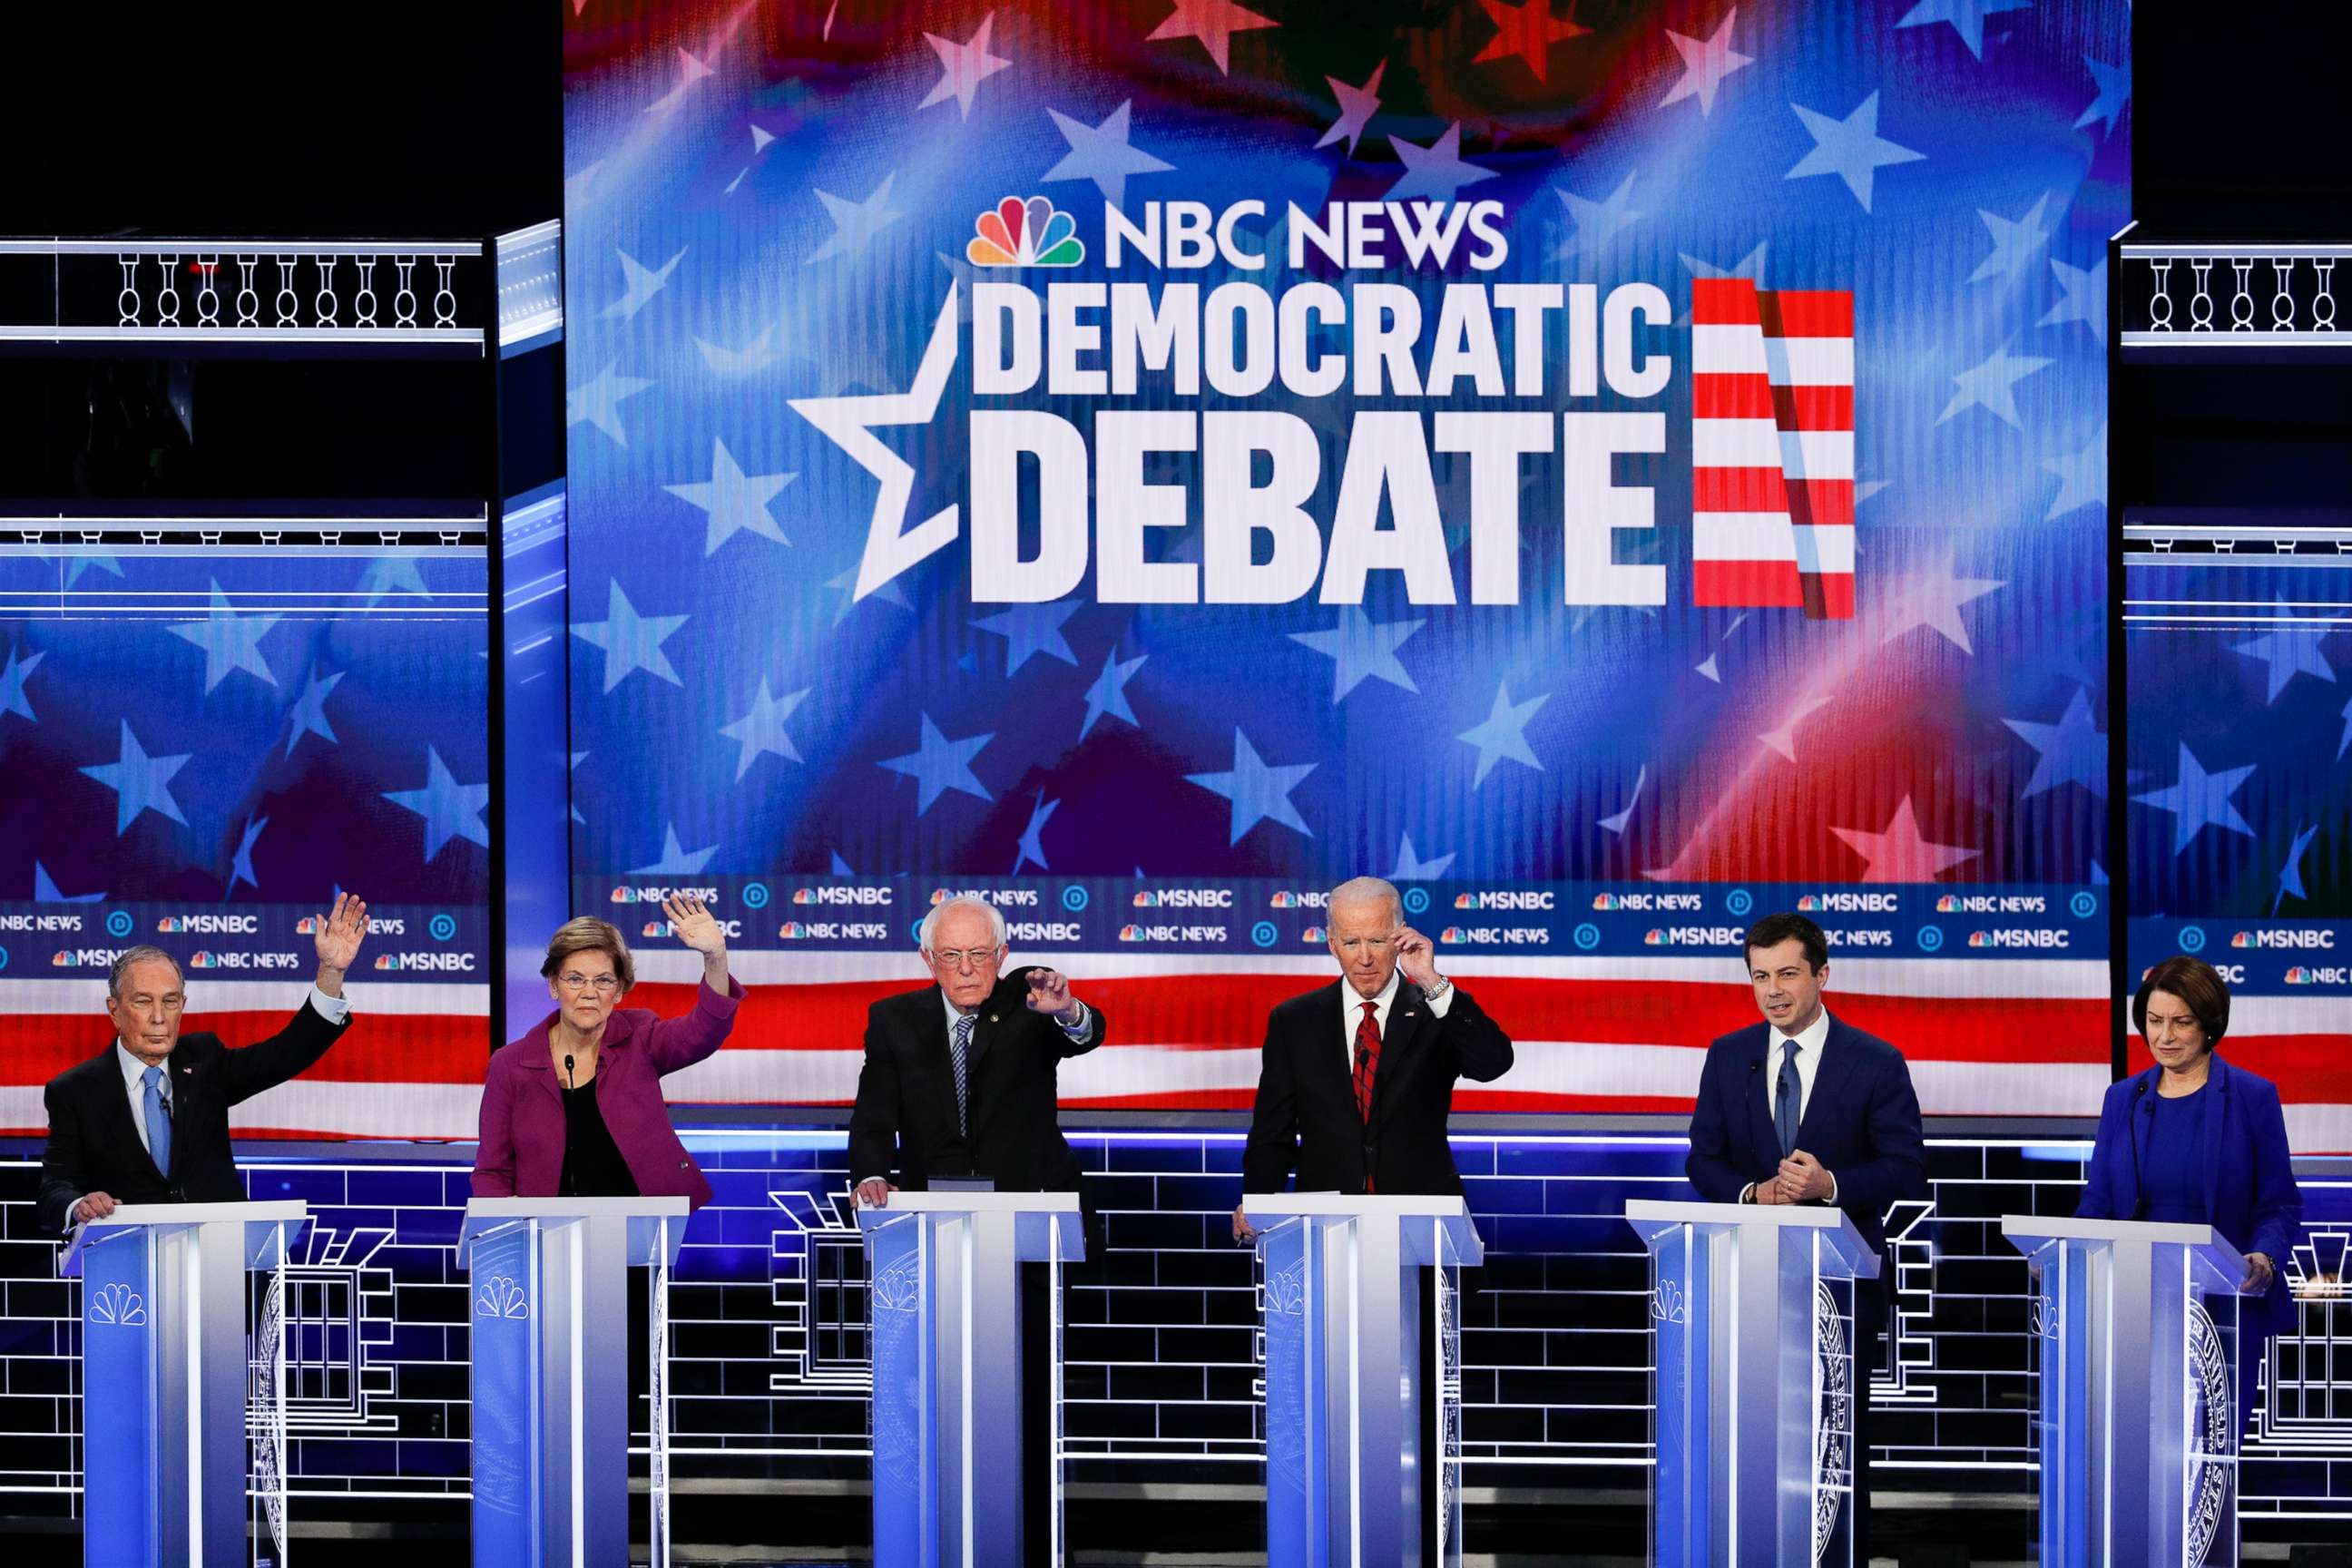 PHOTO: Democratic presidential candidates stand on stage before a Democratic presidential primary debate, Feb. 19, 2020, in Las Vegas, hosted by NBC News and MSNBC.